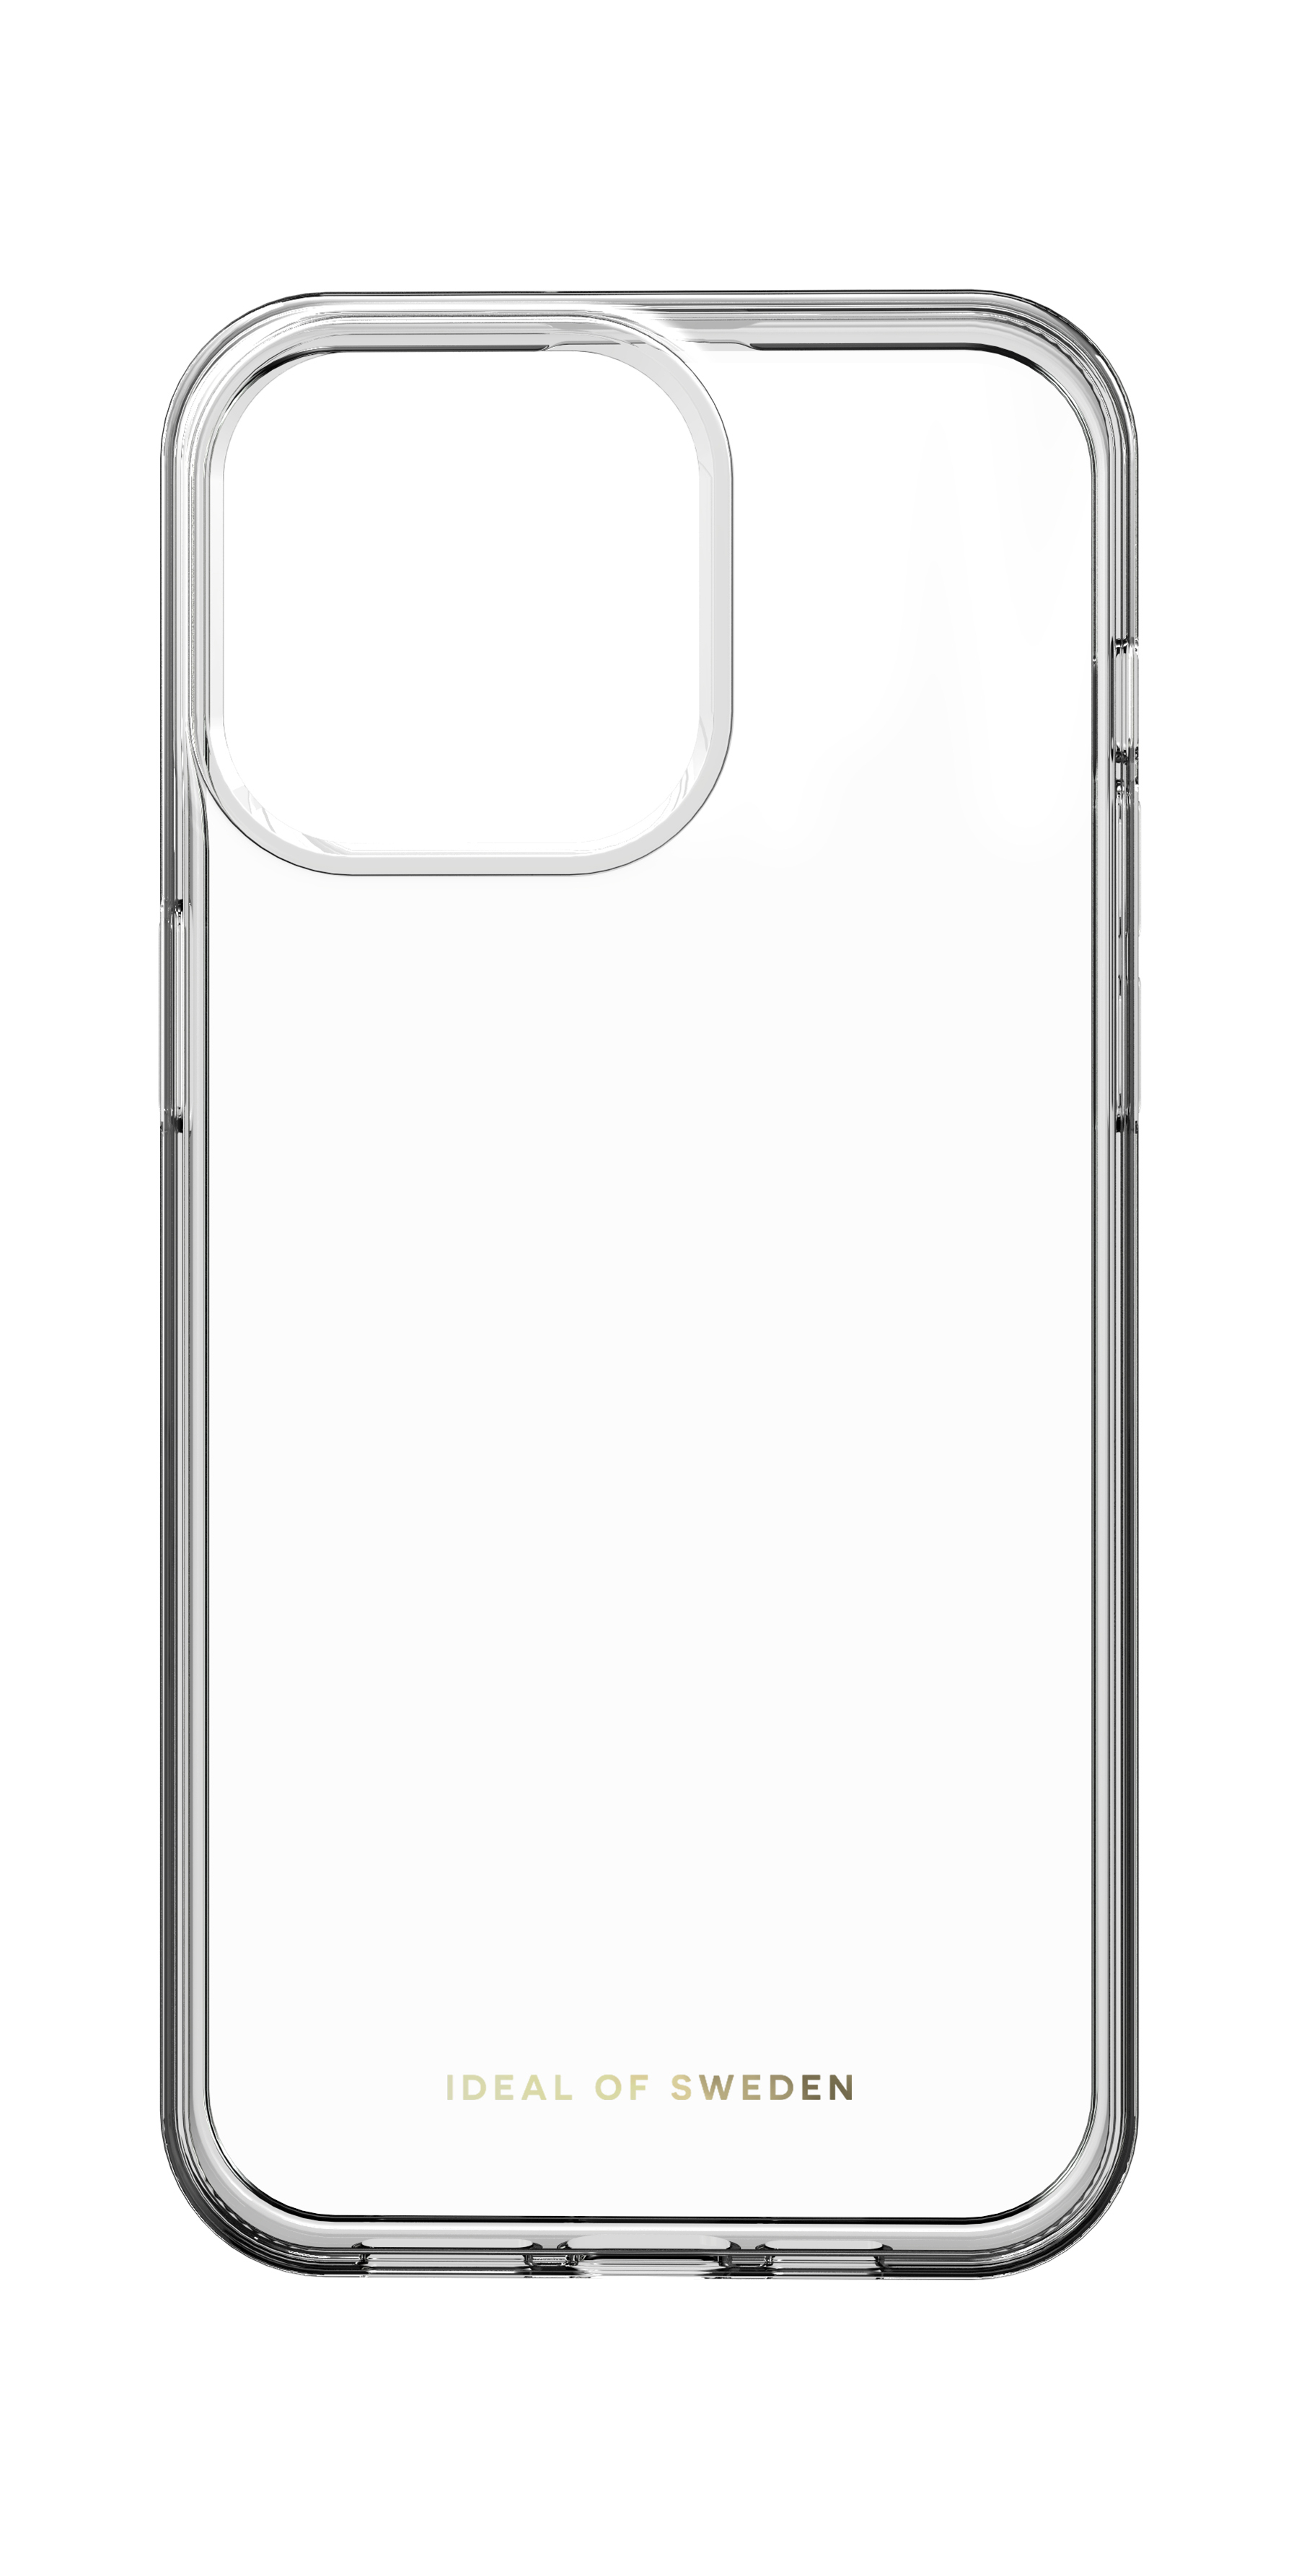 iPhone Backcover, SWEDEN 15, OF Apple, Case, IDEAL Clear Clear